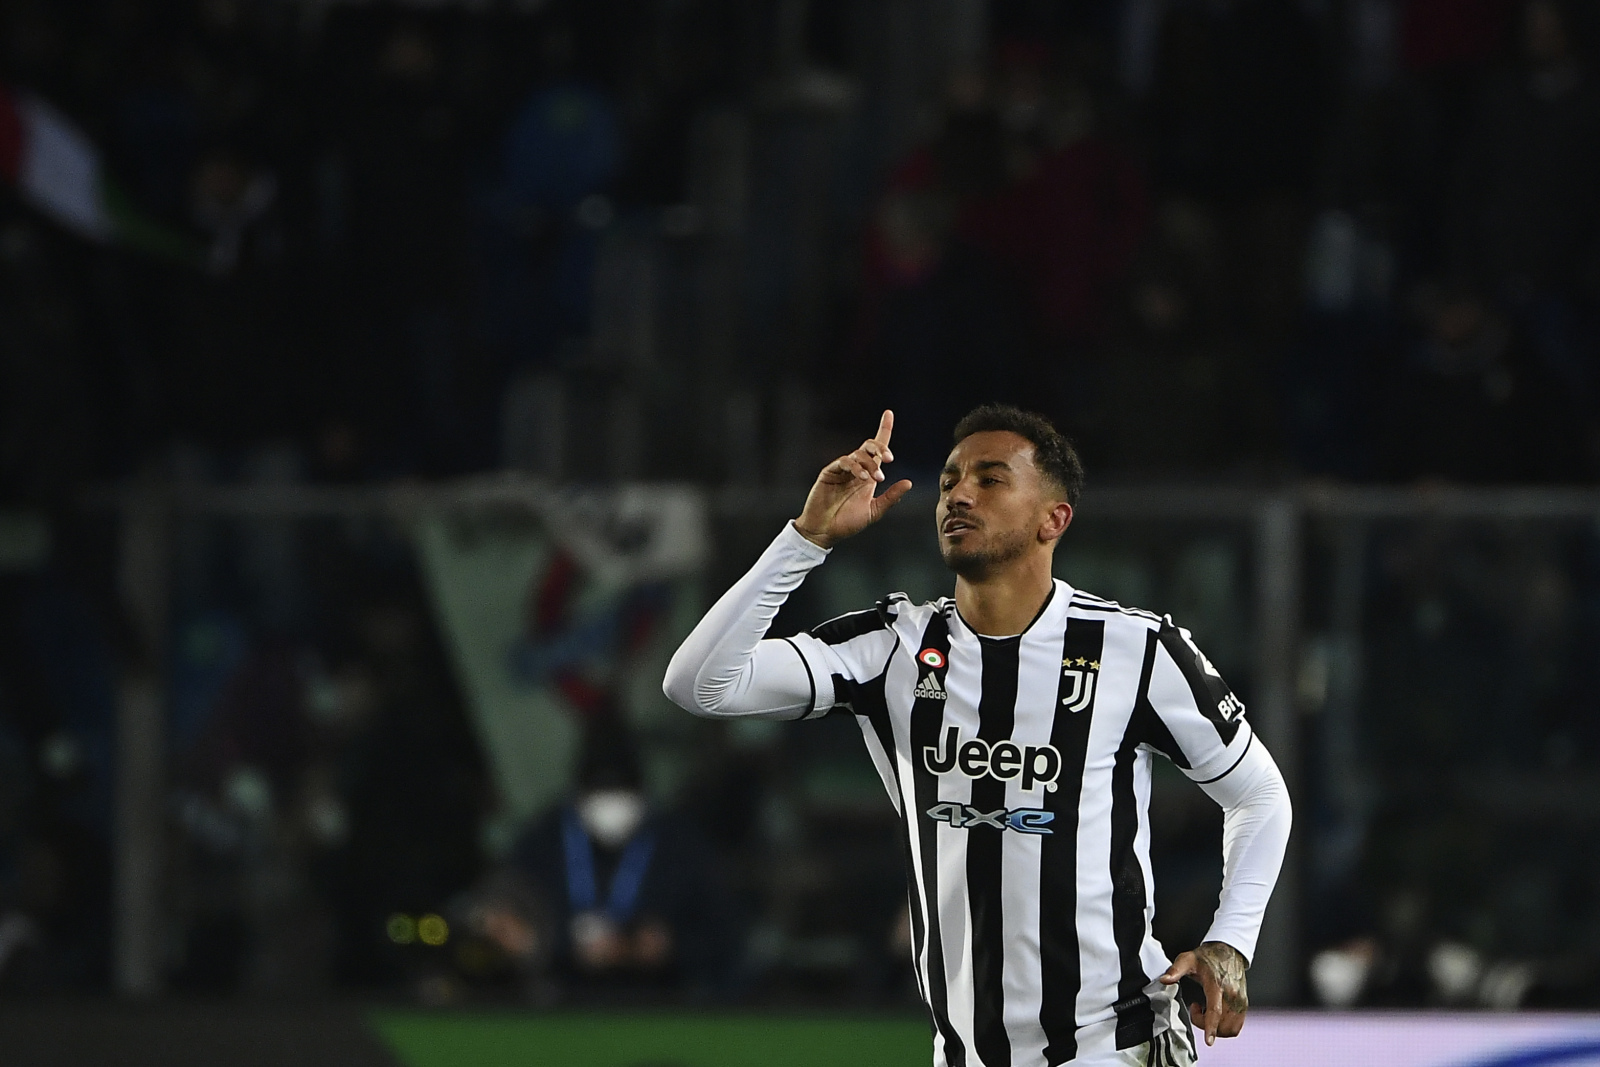 Danilo will stay at Juventus for at least the next two years, as he possesses no interest in moving to either of the big clubs interested in his services.